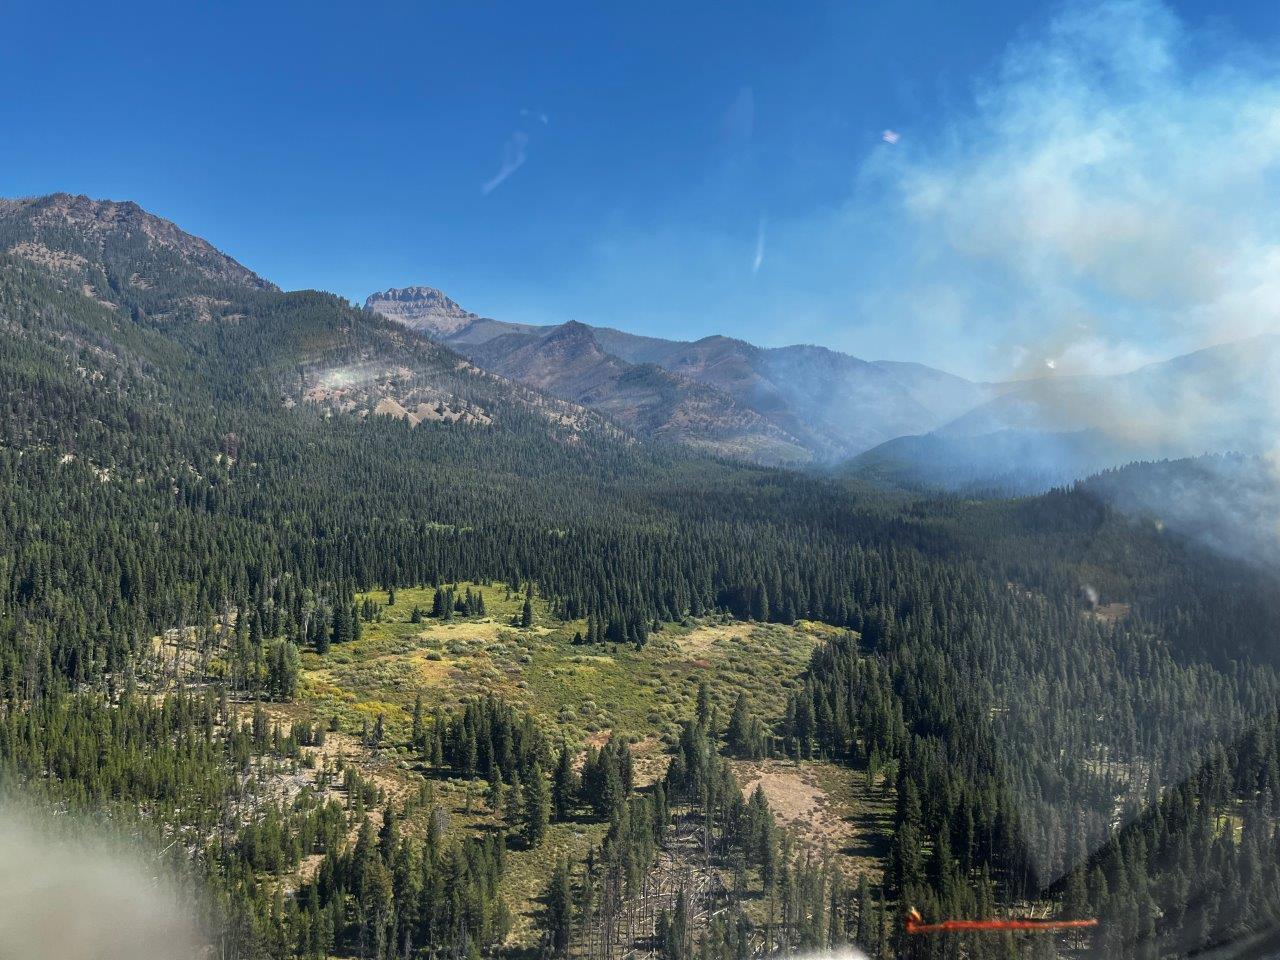 The Ursus Fire as seen looking east at approx. 1330 on 9/5/2022